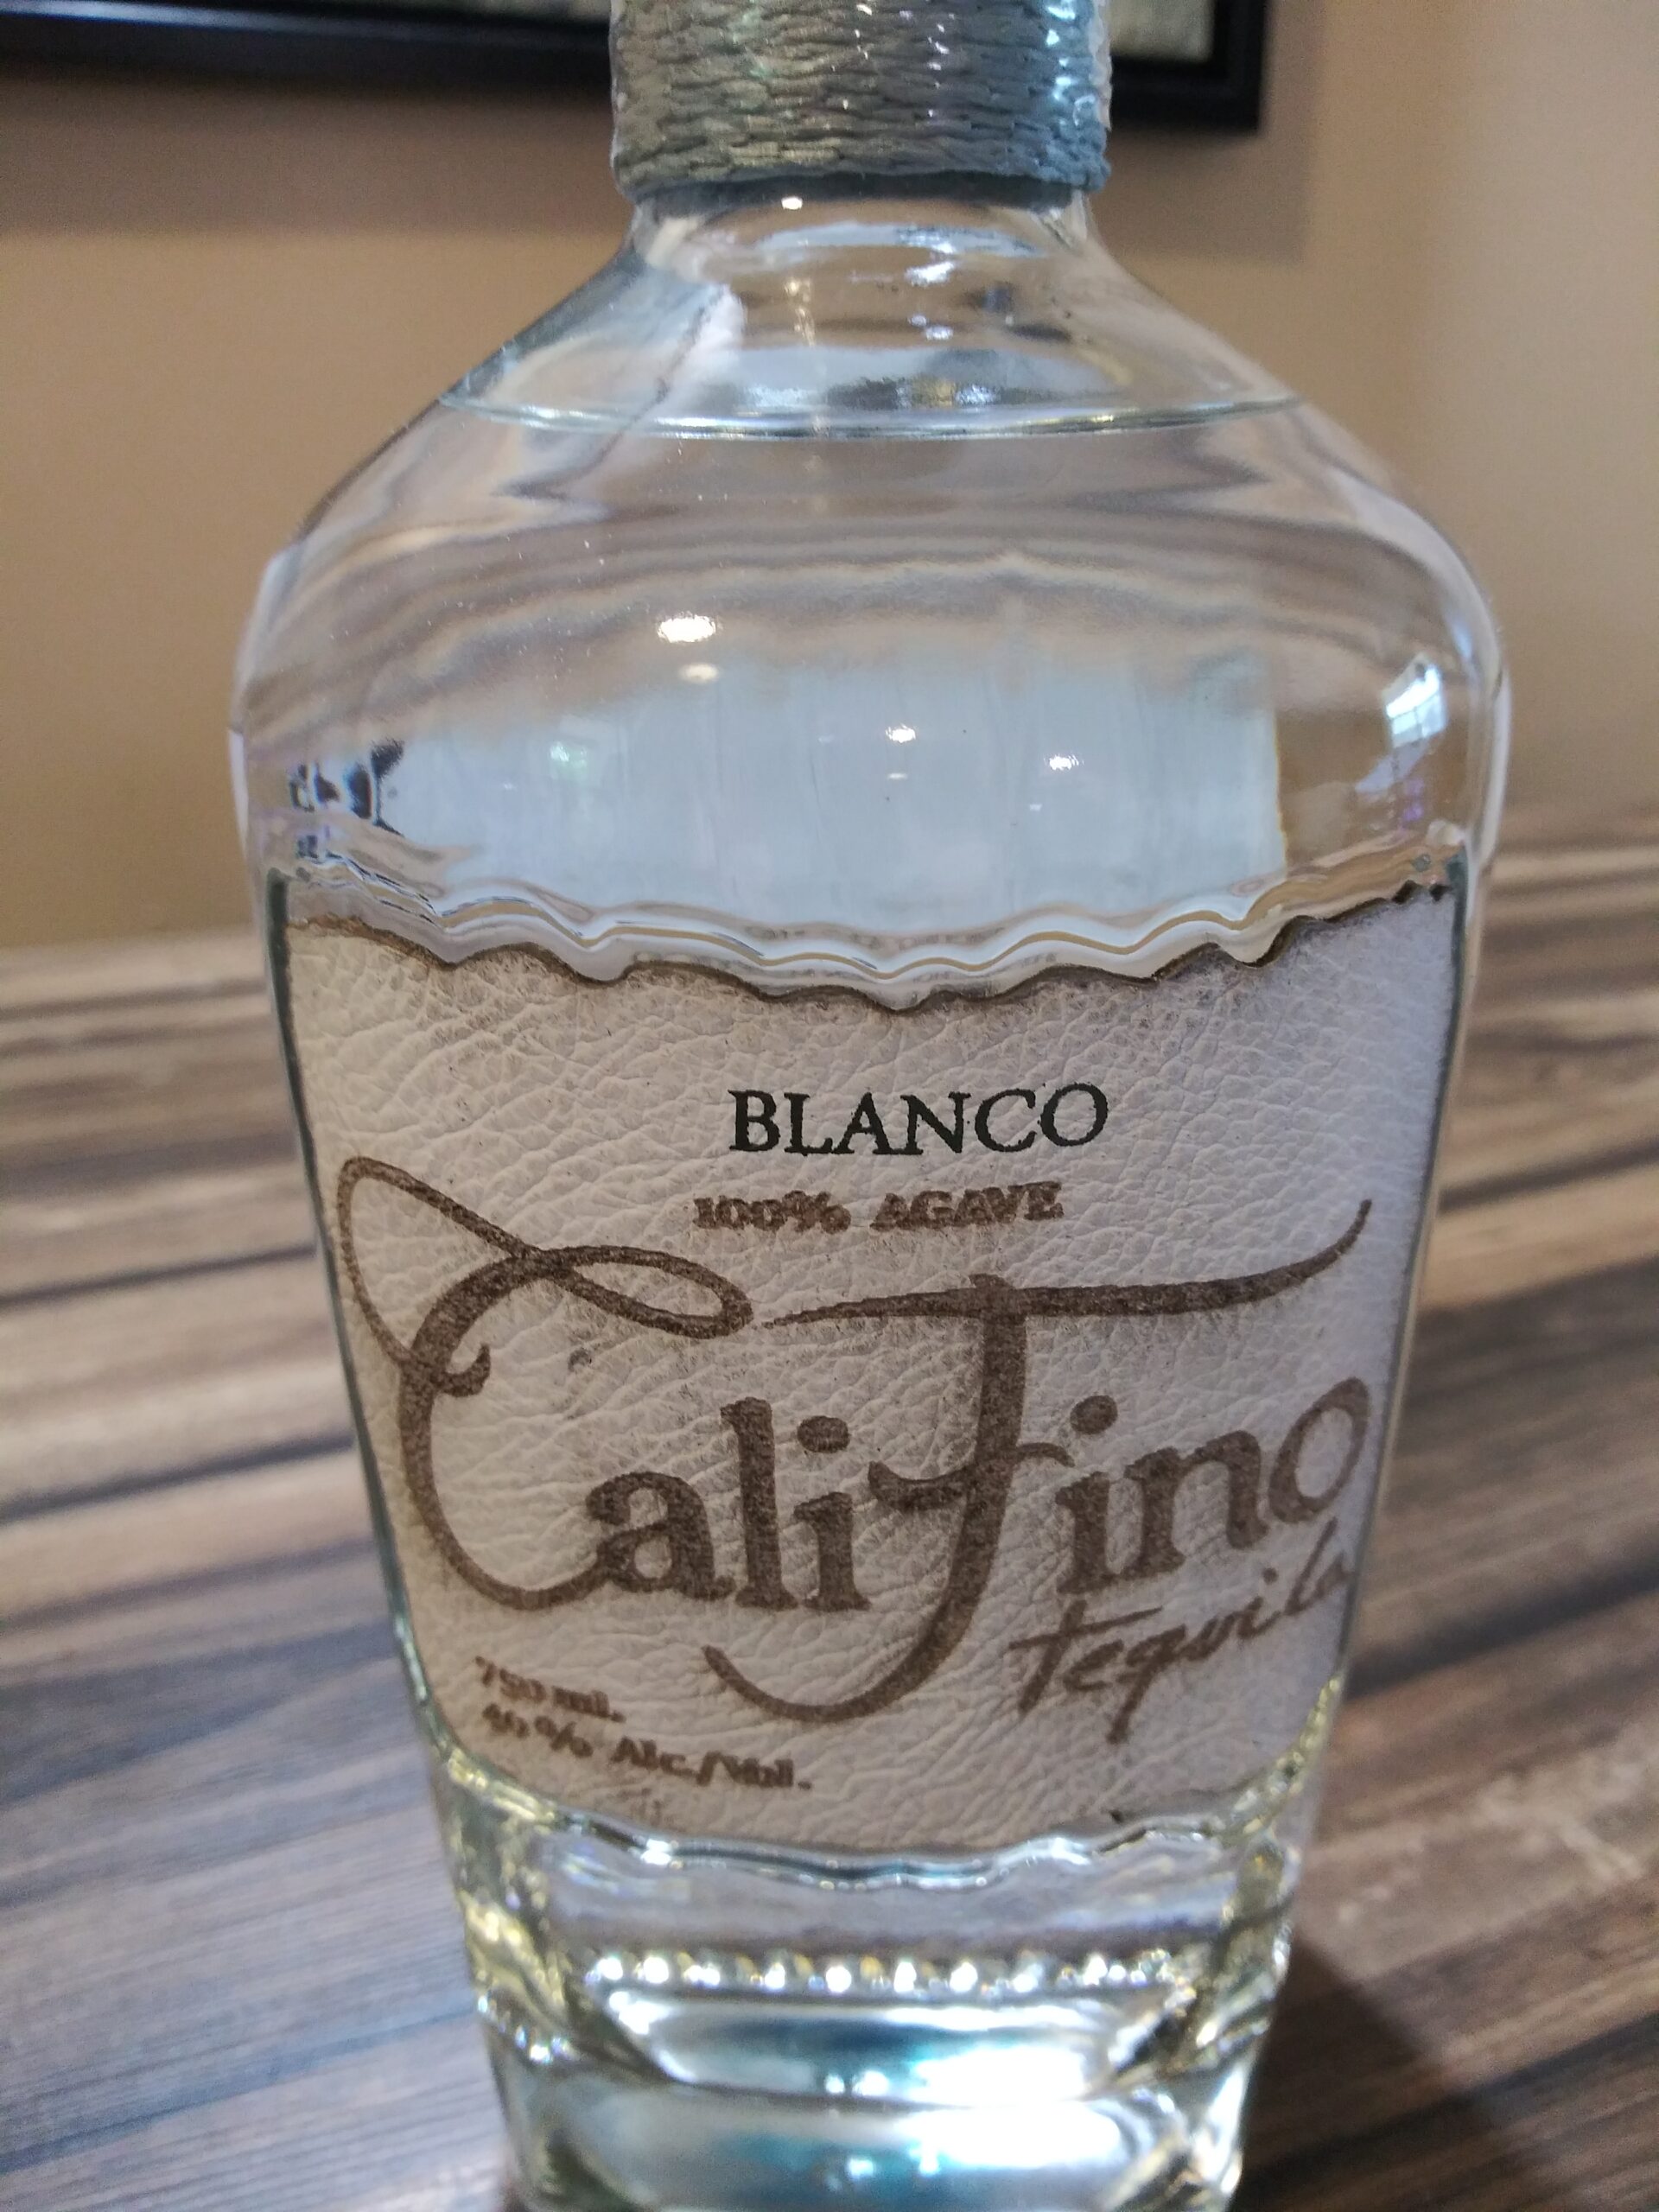 CaliFino! Tequila cocktails for spring